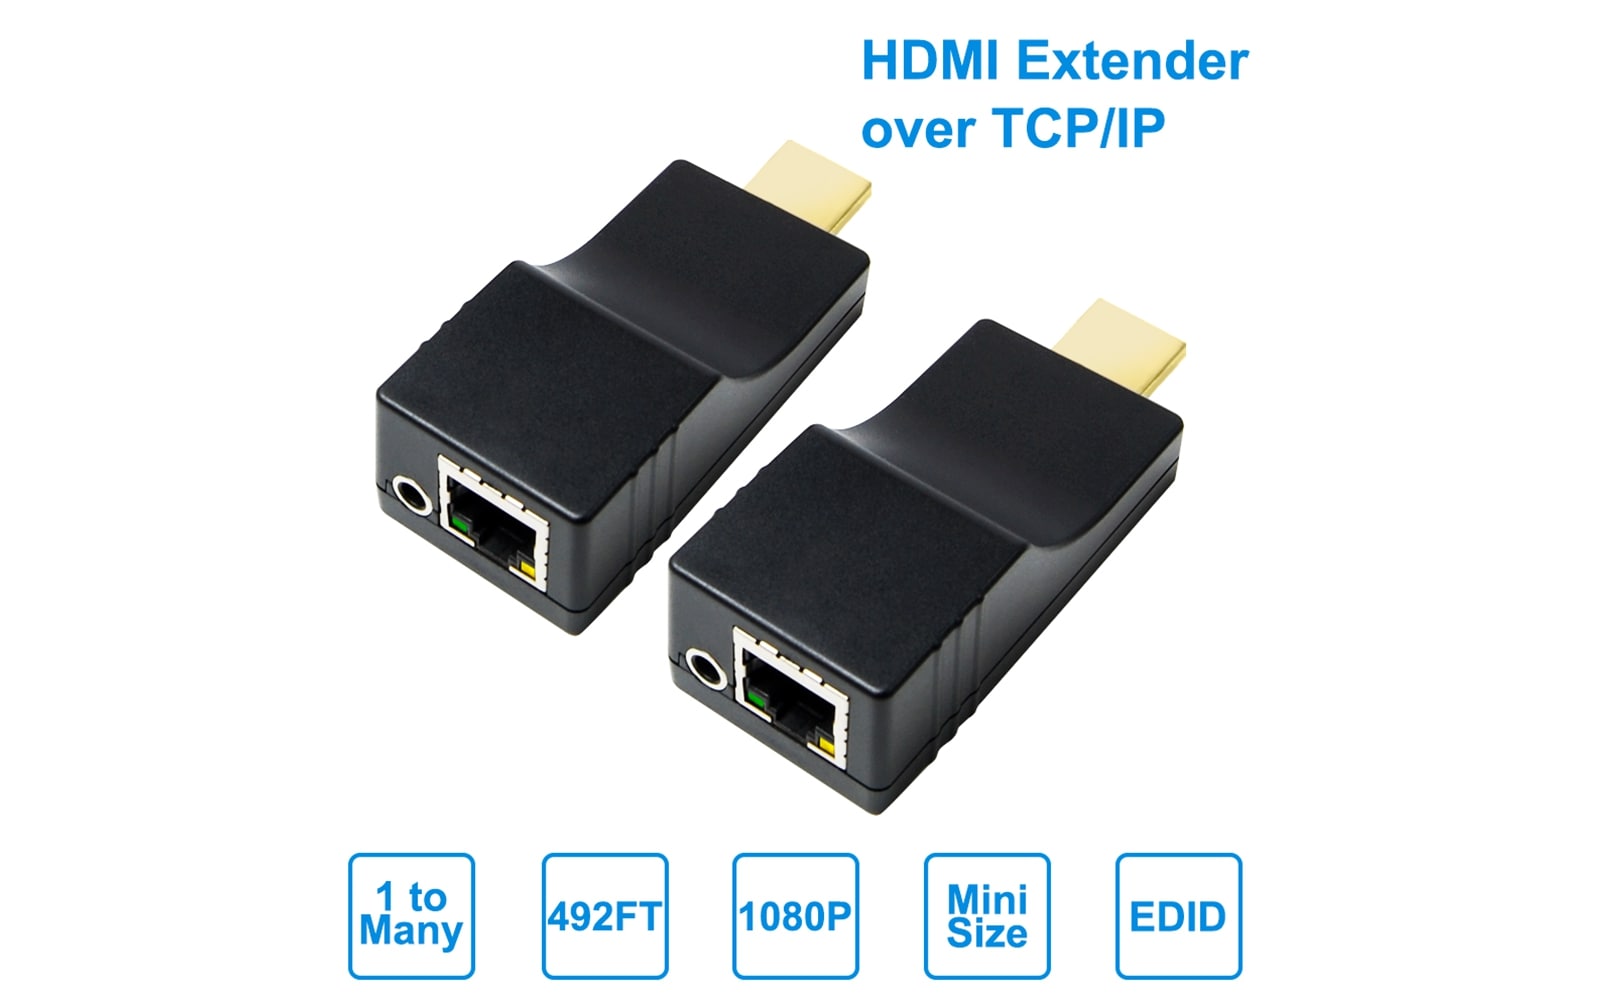 1080P IP Extender, Hdmi over Ip 150M